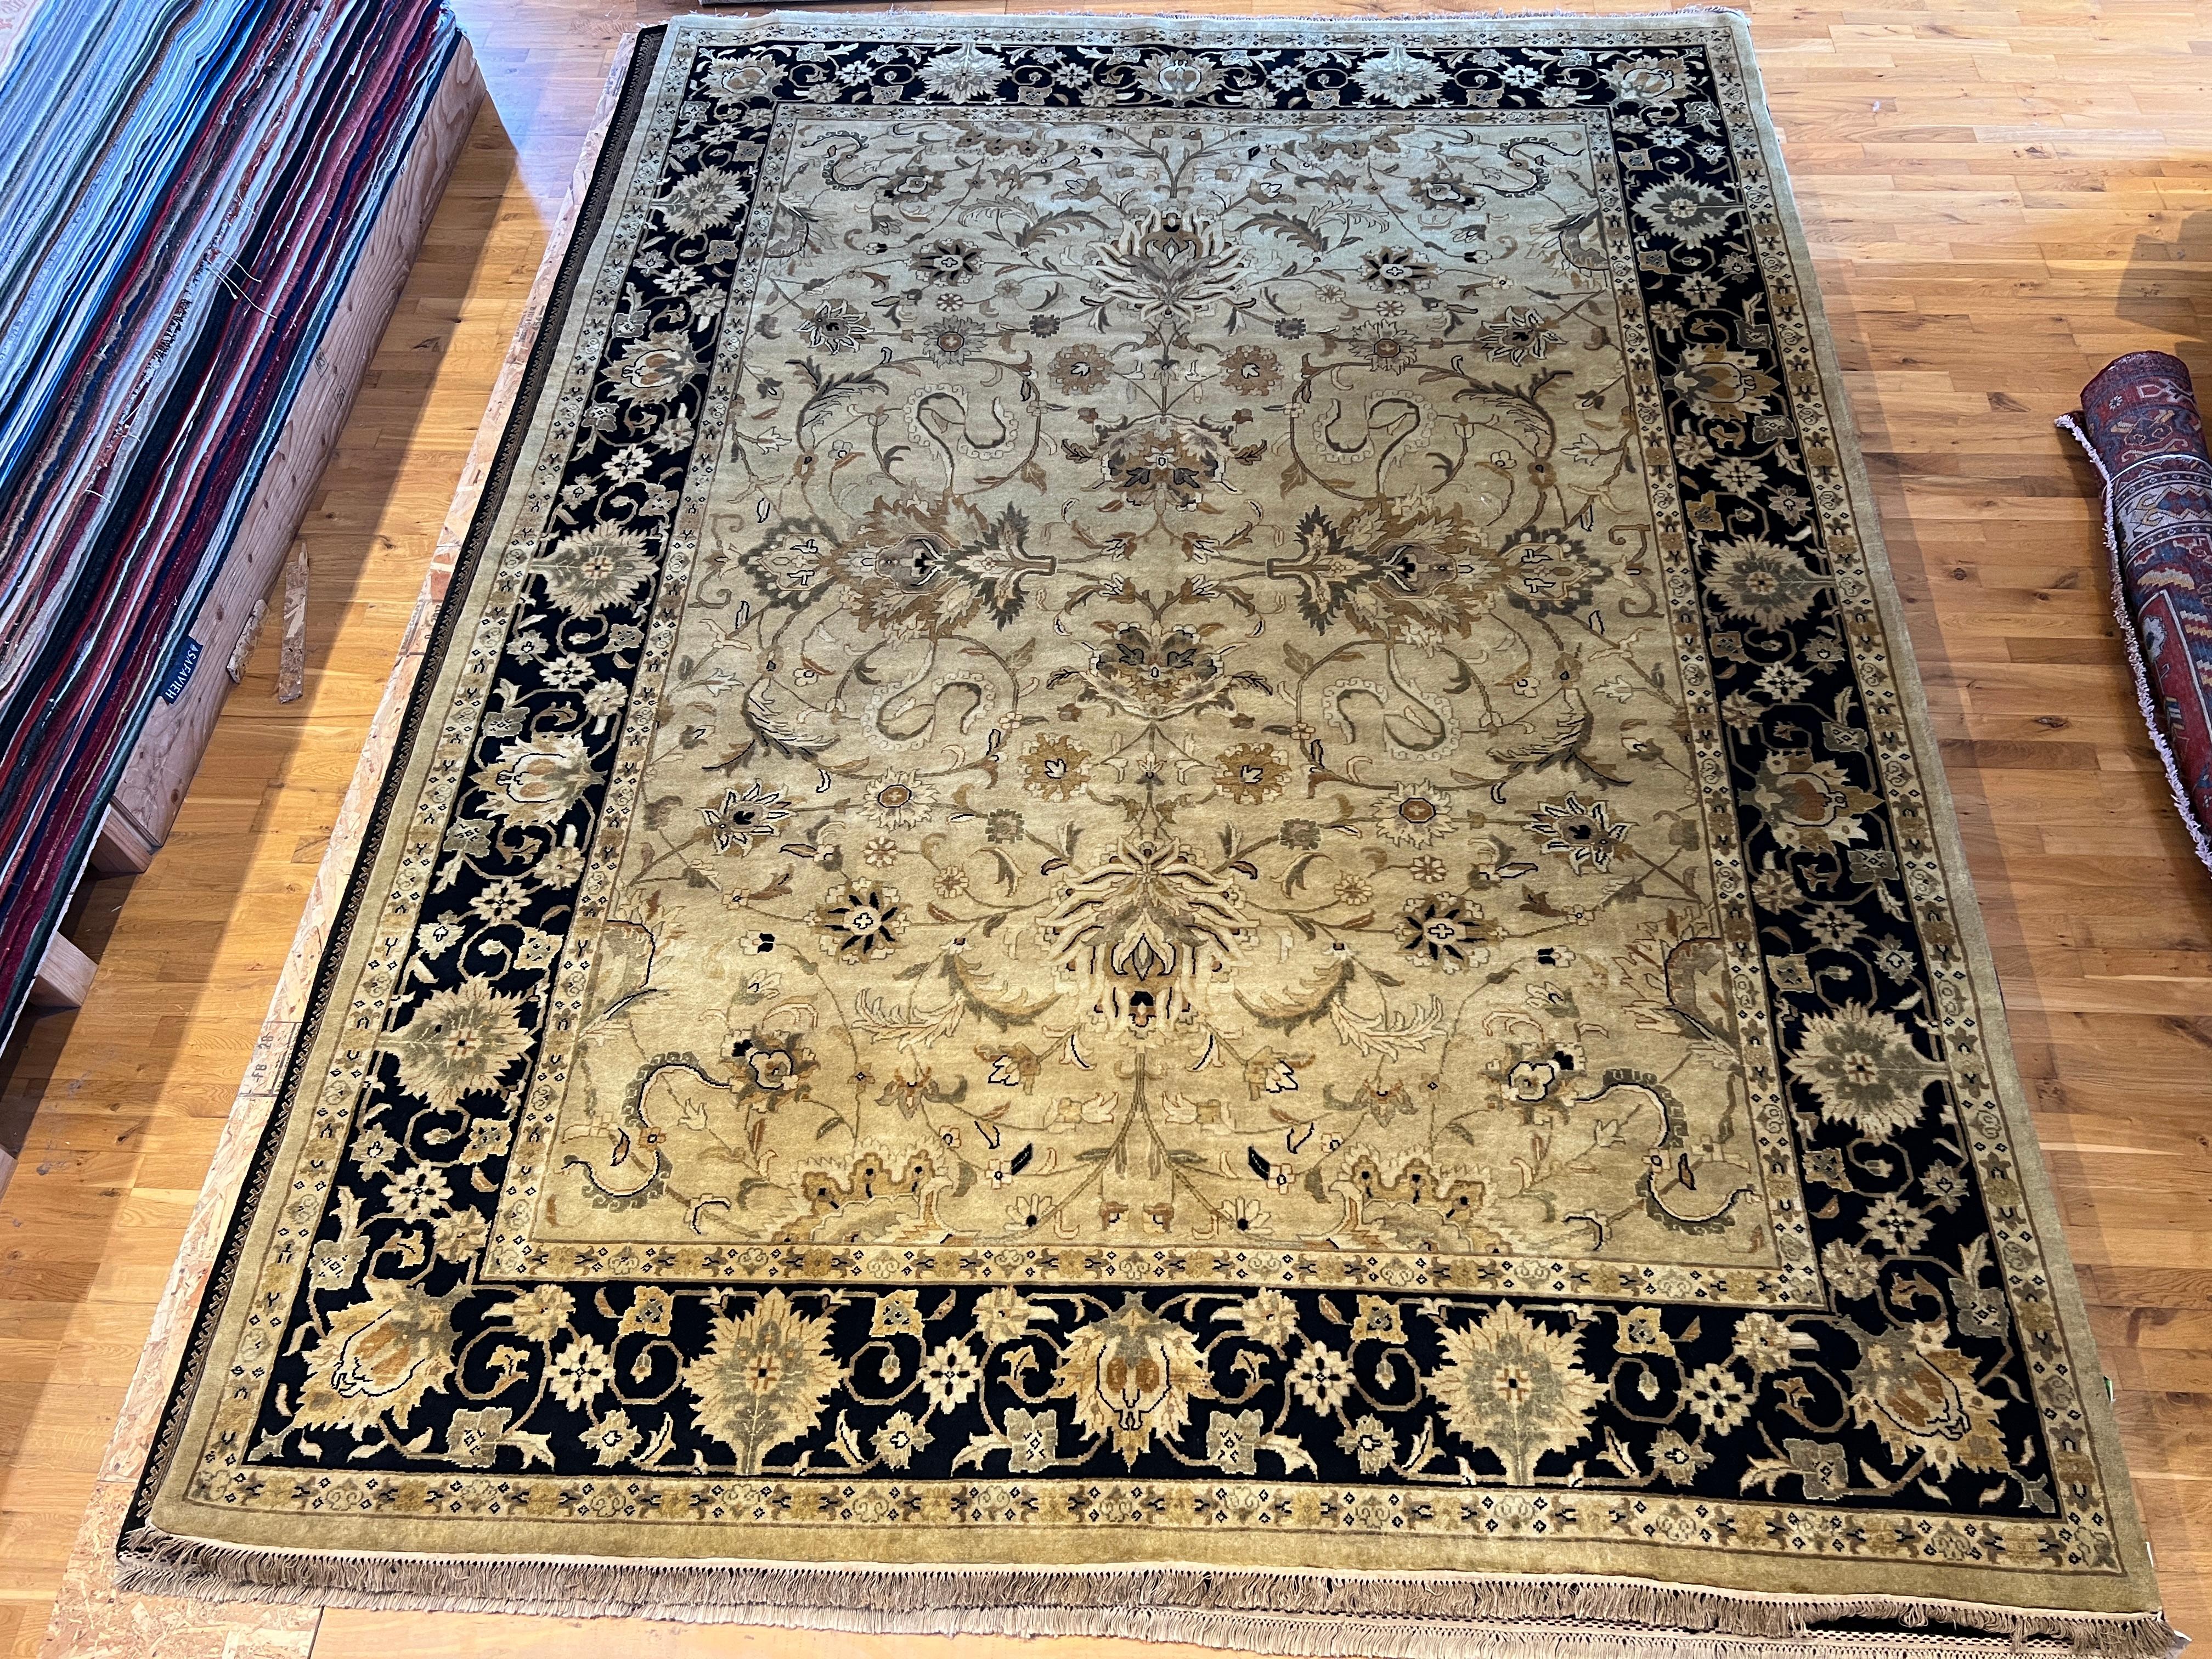 Introducing our beautiful 9'x12' Persian design rug, hand-knotted in India using all wool and natural dyes. Featuring a modernized black border and ivory field, this rug will add a touch of elegance and sophistication to any room. Experience the